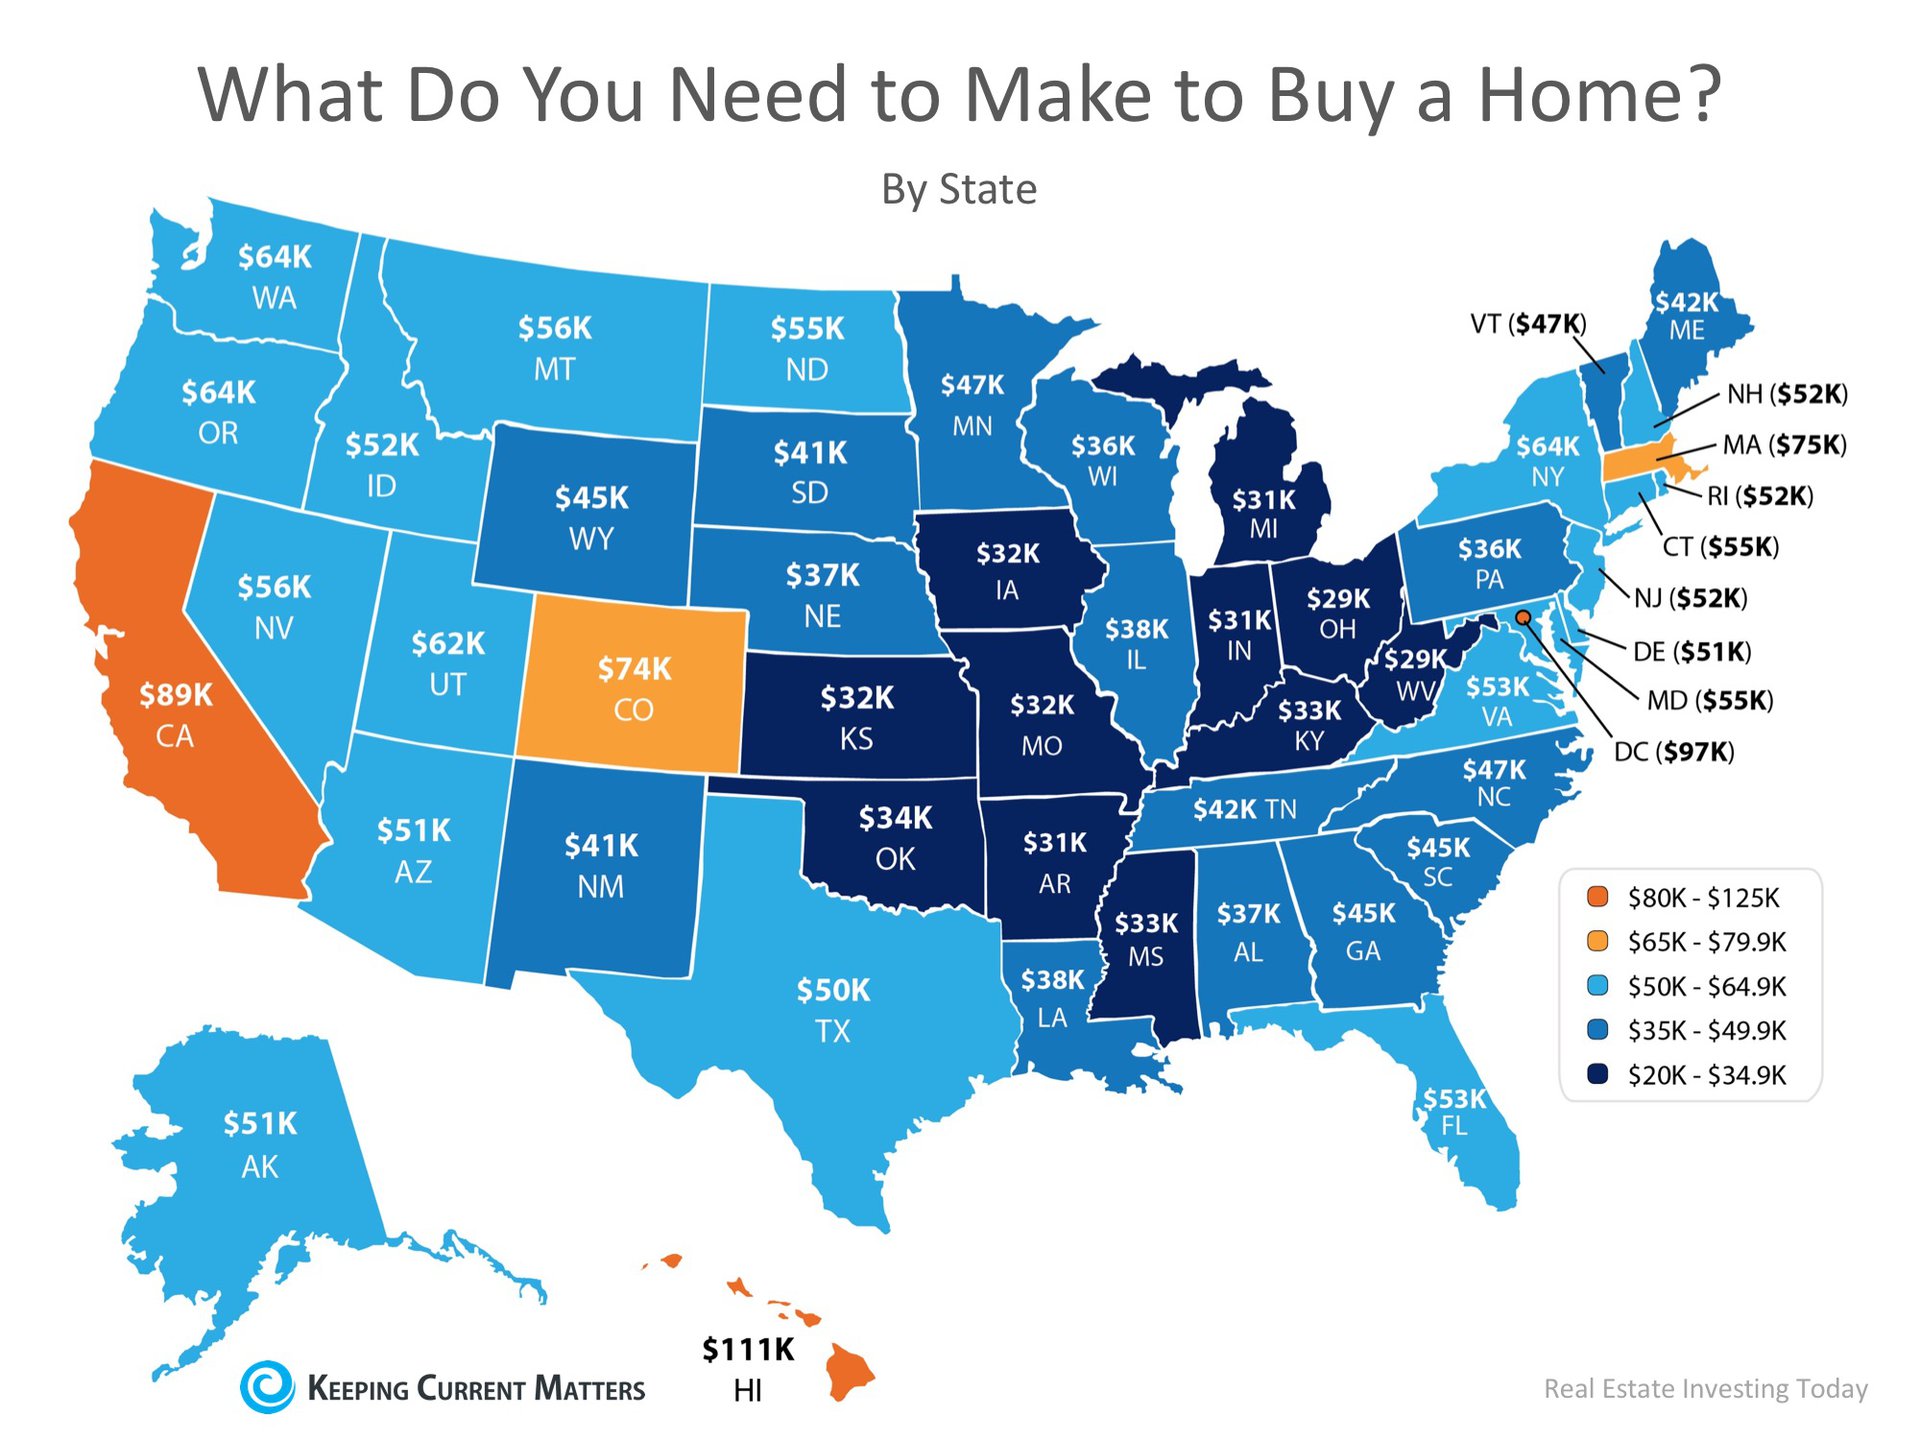 How Much Do You Need to Make to Buy a Home in Your State? | Keeping Current Matters